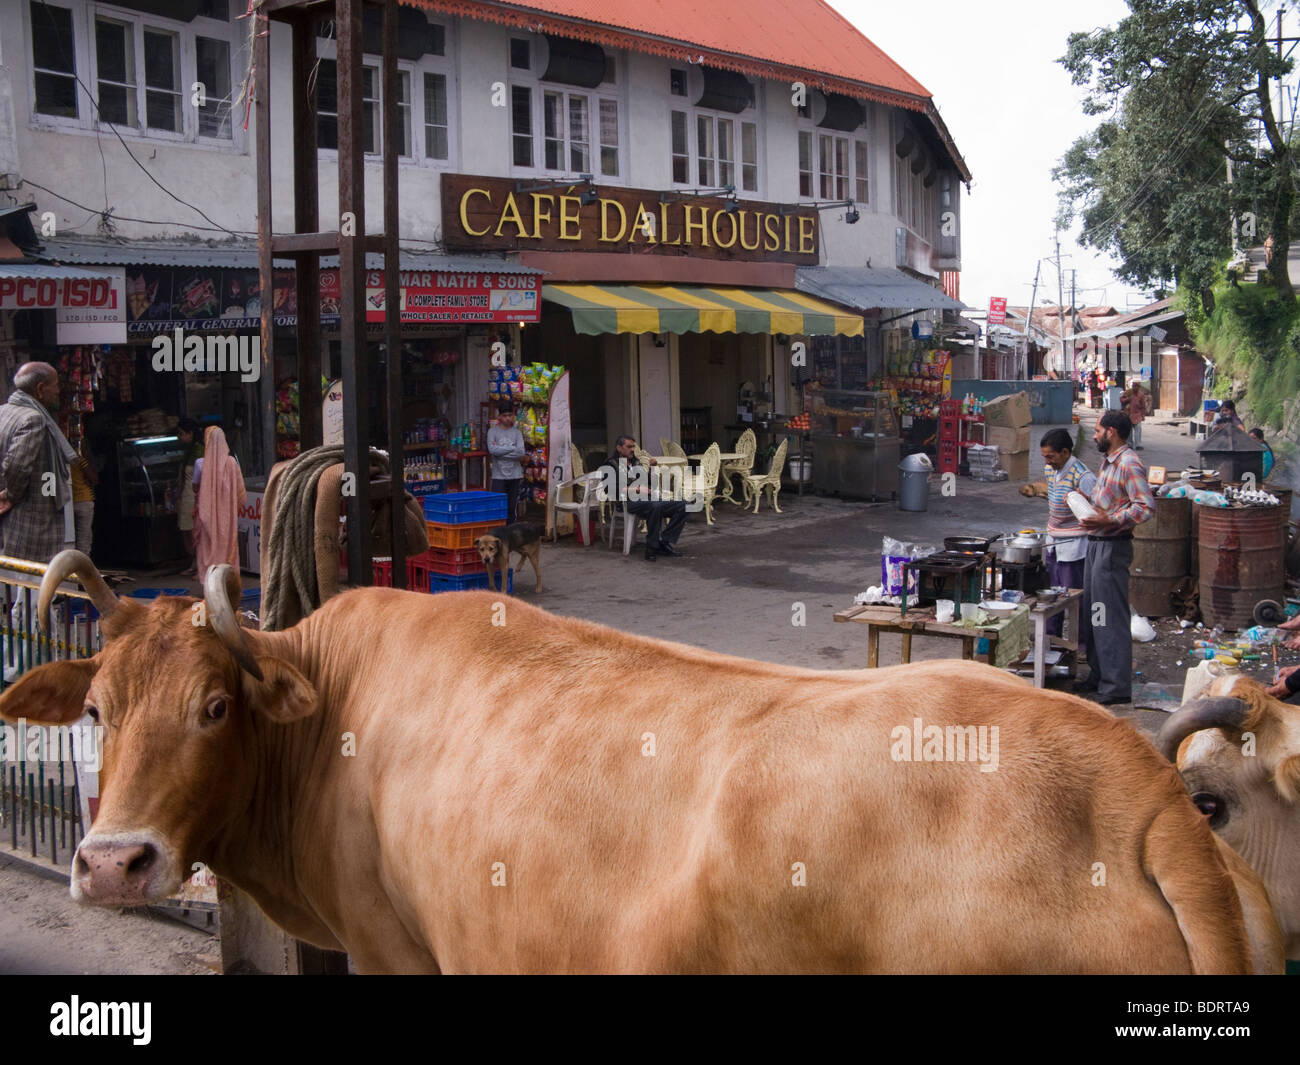 A cow and the front exterior of the Cafe Dalhousie in a typical road scene in central Dalhousie. Himachal Pradesh. India. Stock Photo